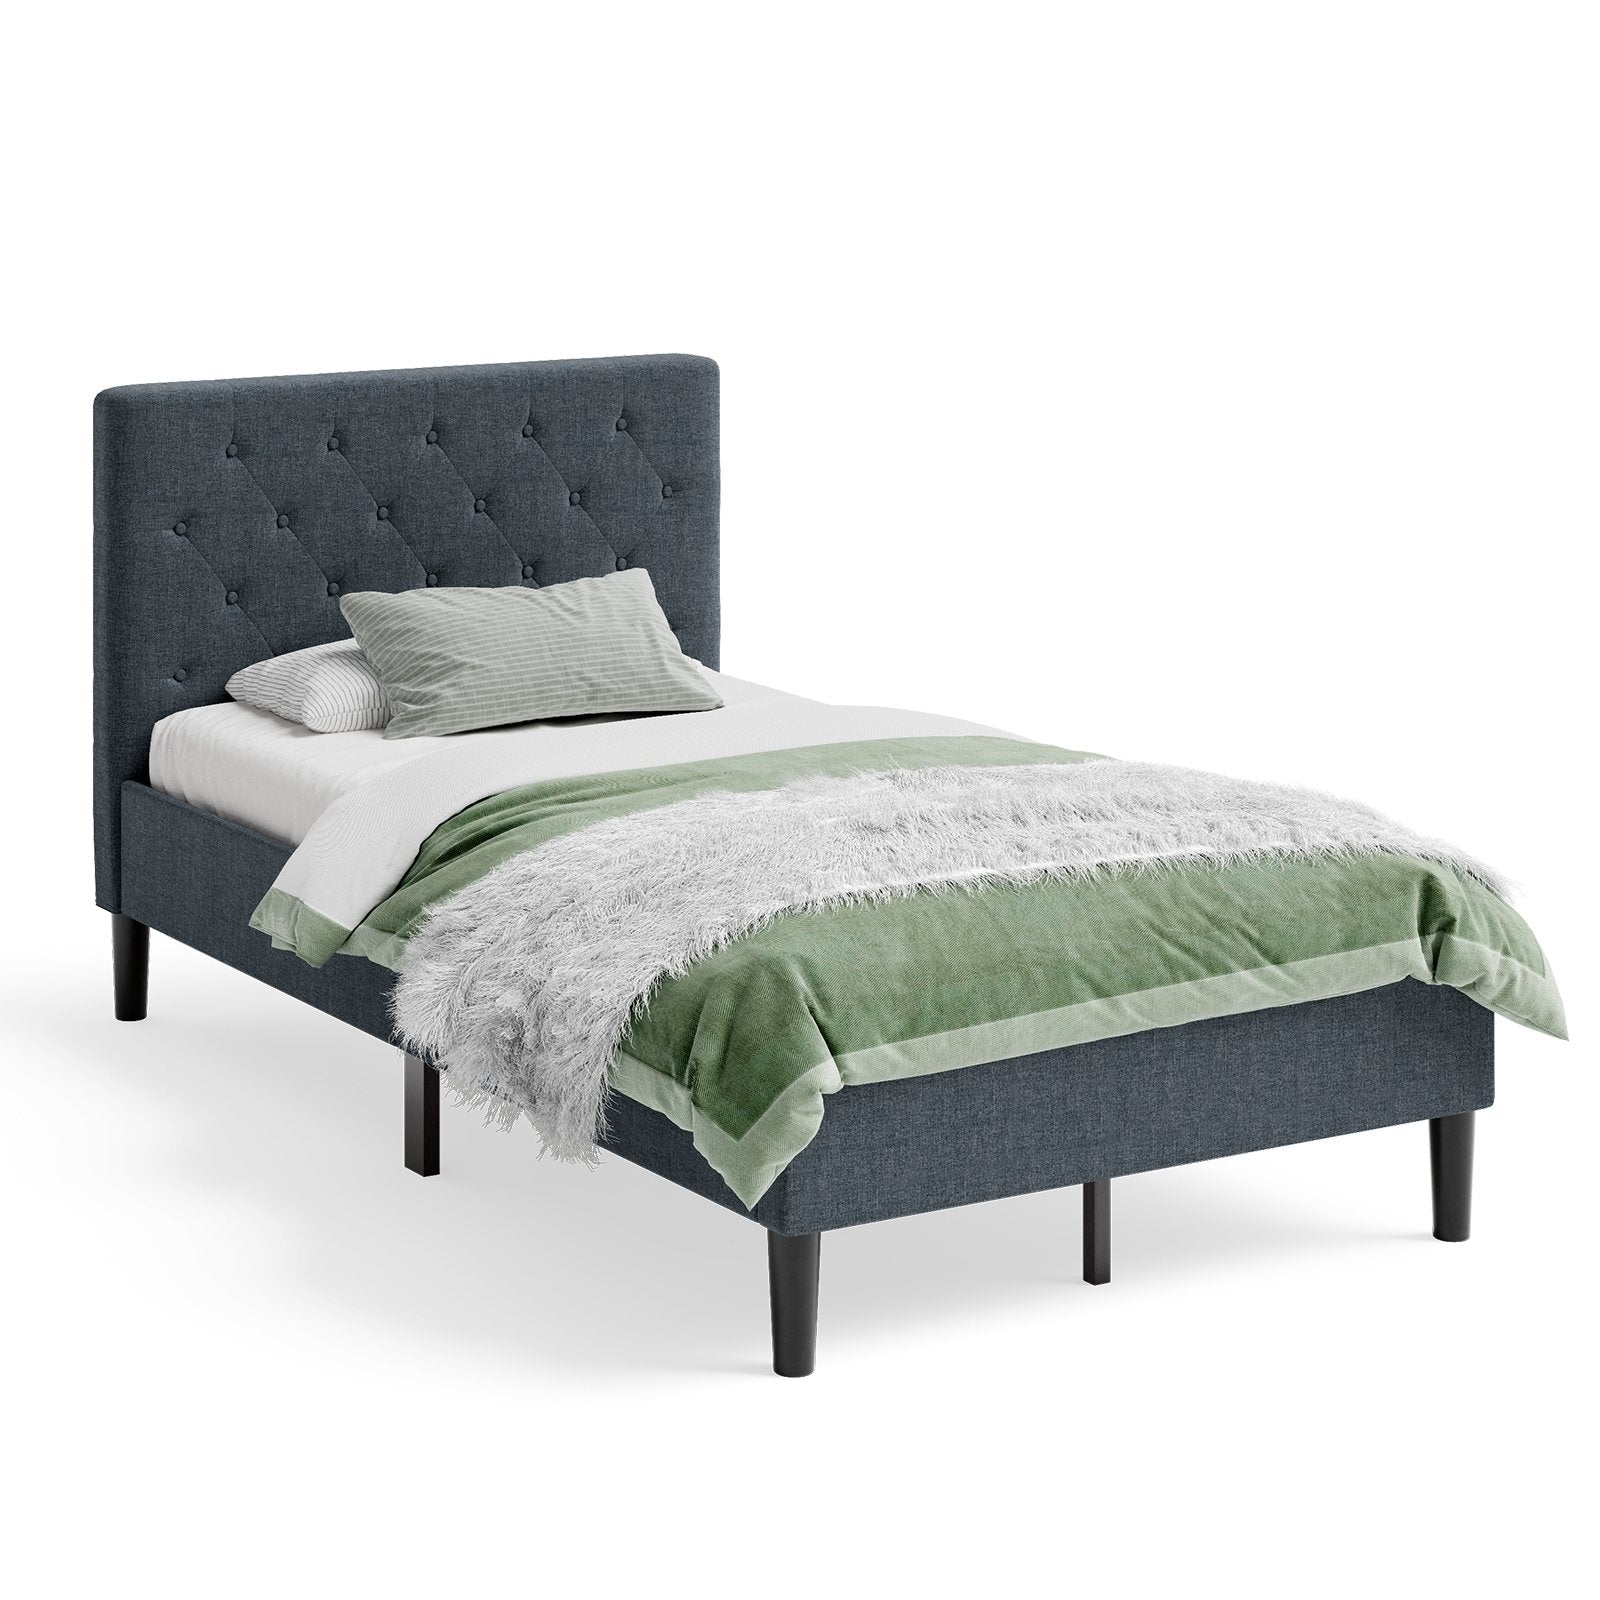 Upholstered Bed Base with Button Stitched Headboard, Black at Gallery Canada